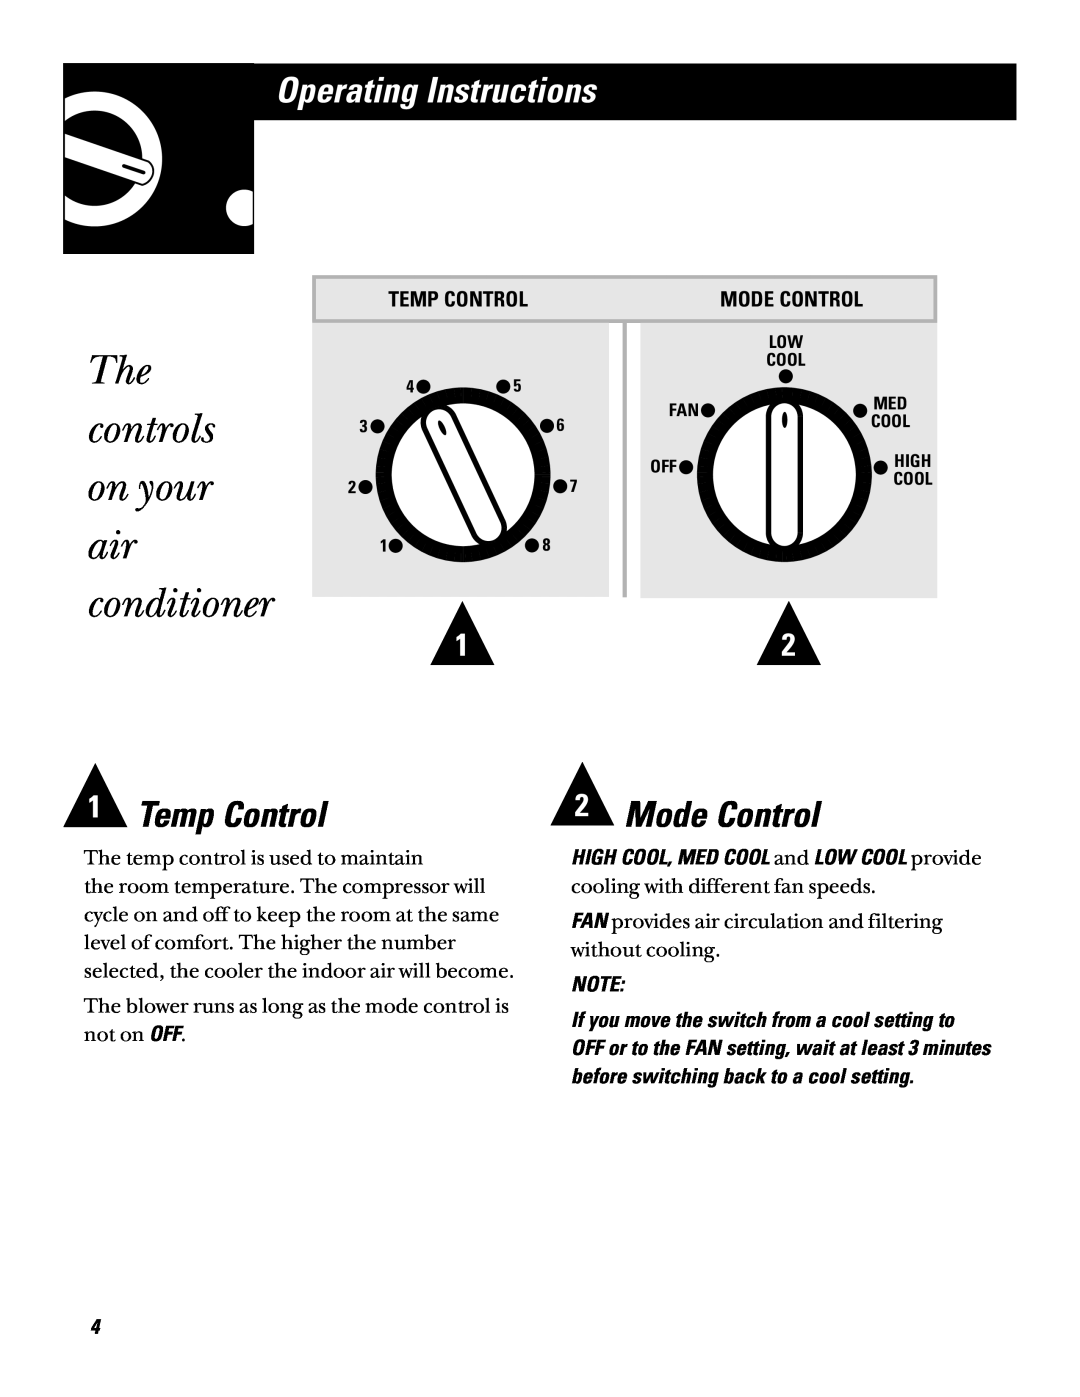 GE AQV05, AQV06 The controls on your, air conditioner, Operating Instructions, 1Temp Control, 2Mode Control 